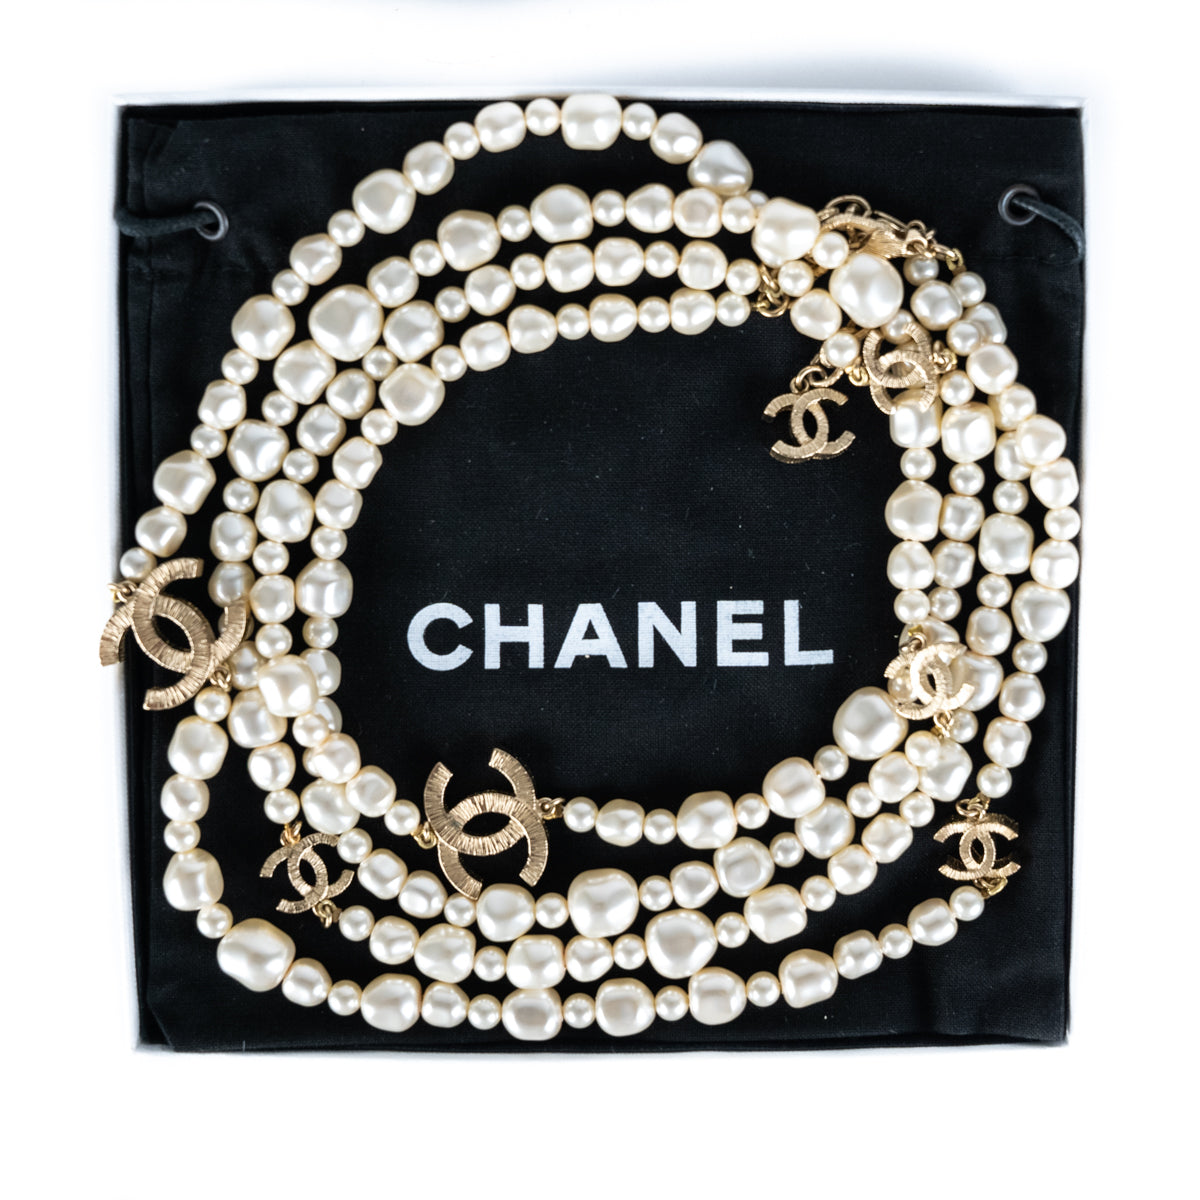 My vintage Chanel Costume Jewelry Collection  Chanel costume jewelry Chanel  jewelry Vintage costume jewelry